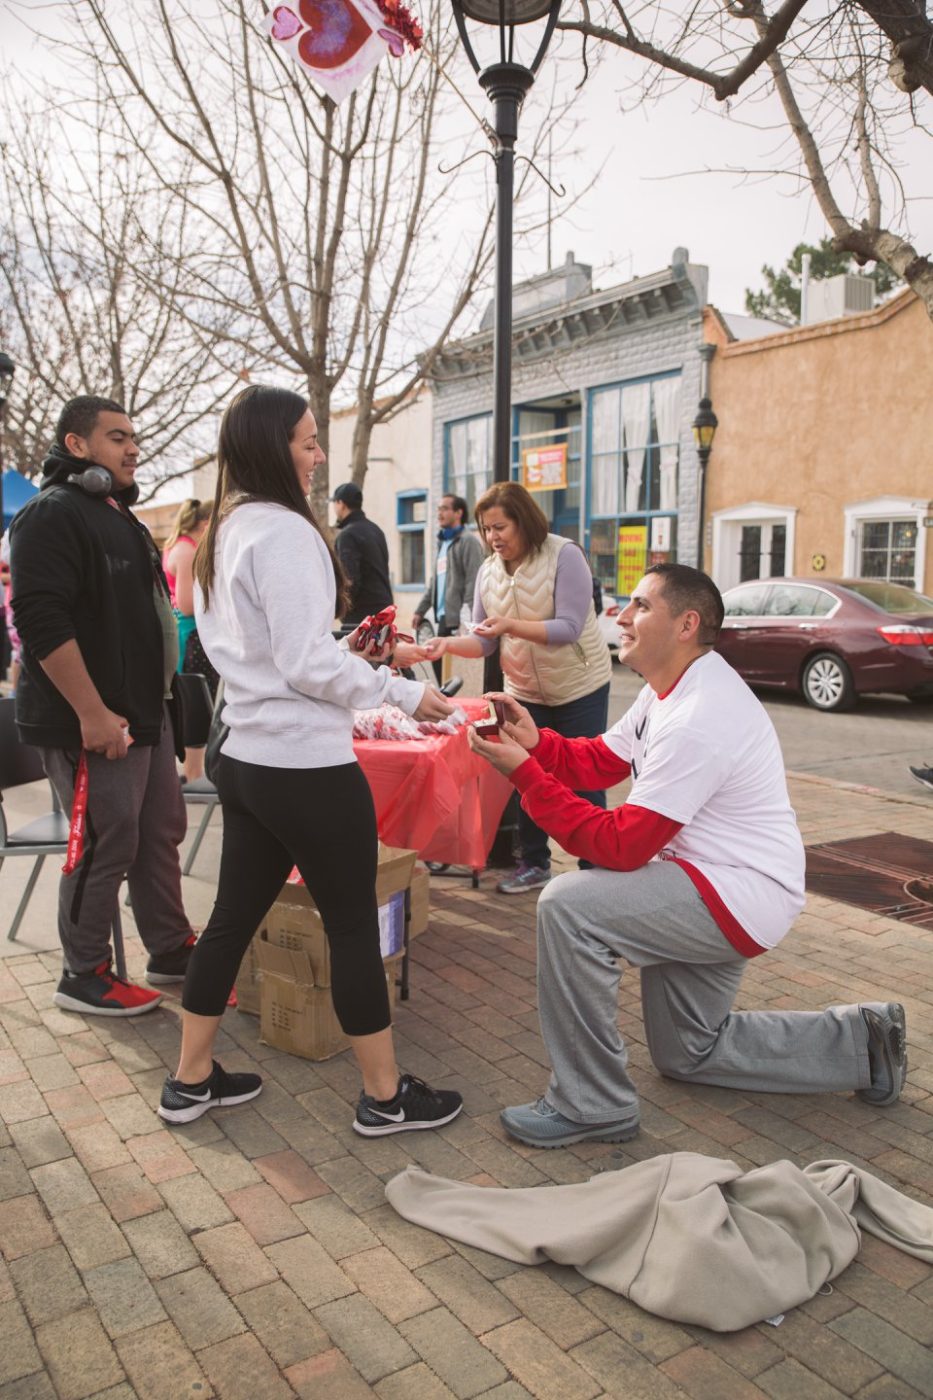 Robert Lopez Proposes To Kiana At Las Cruces Cupid's Chase 5k In 2018